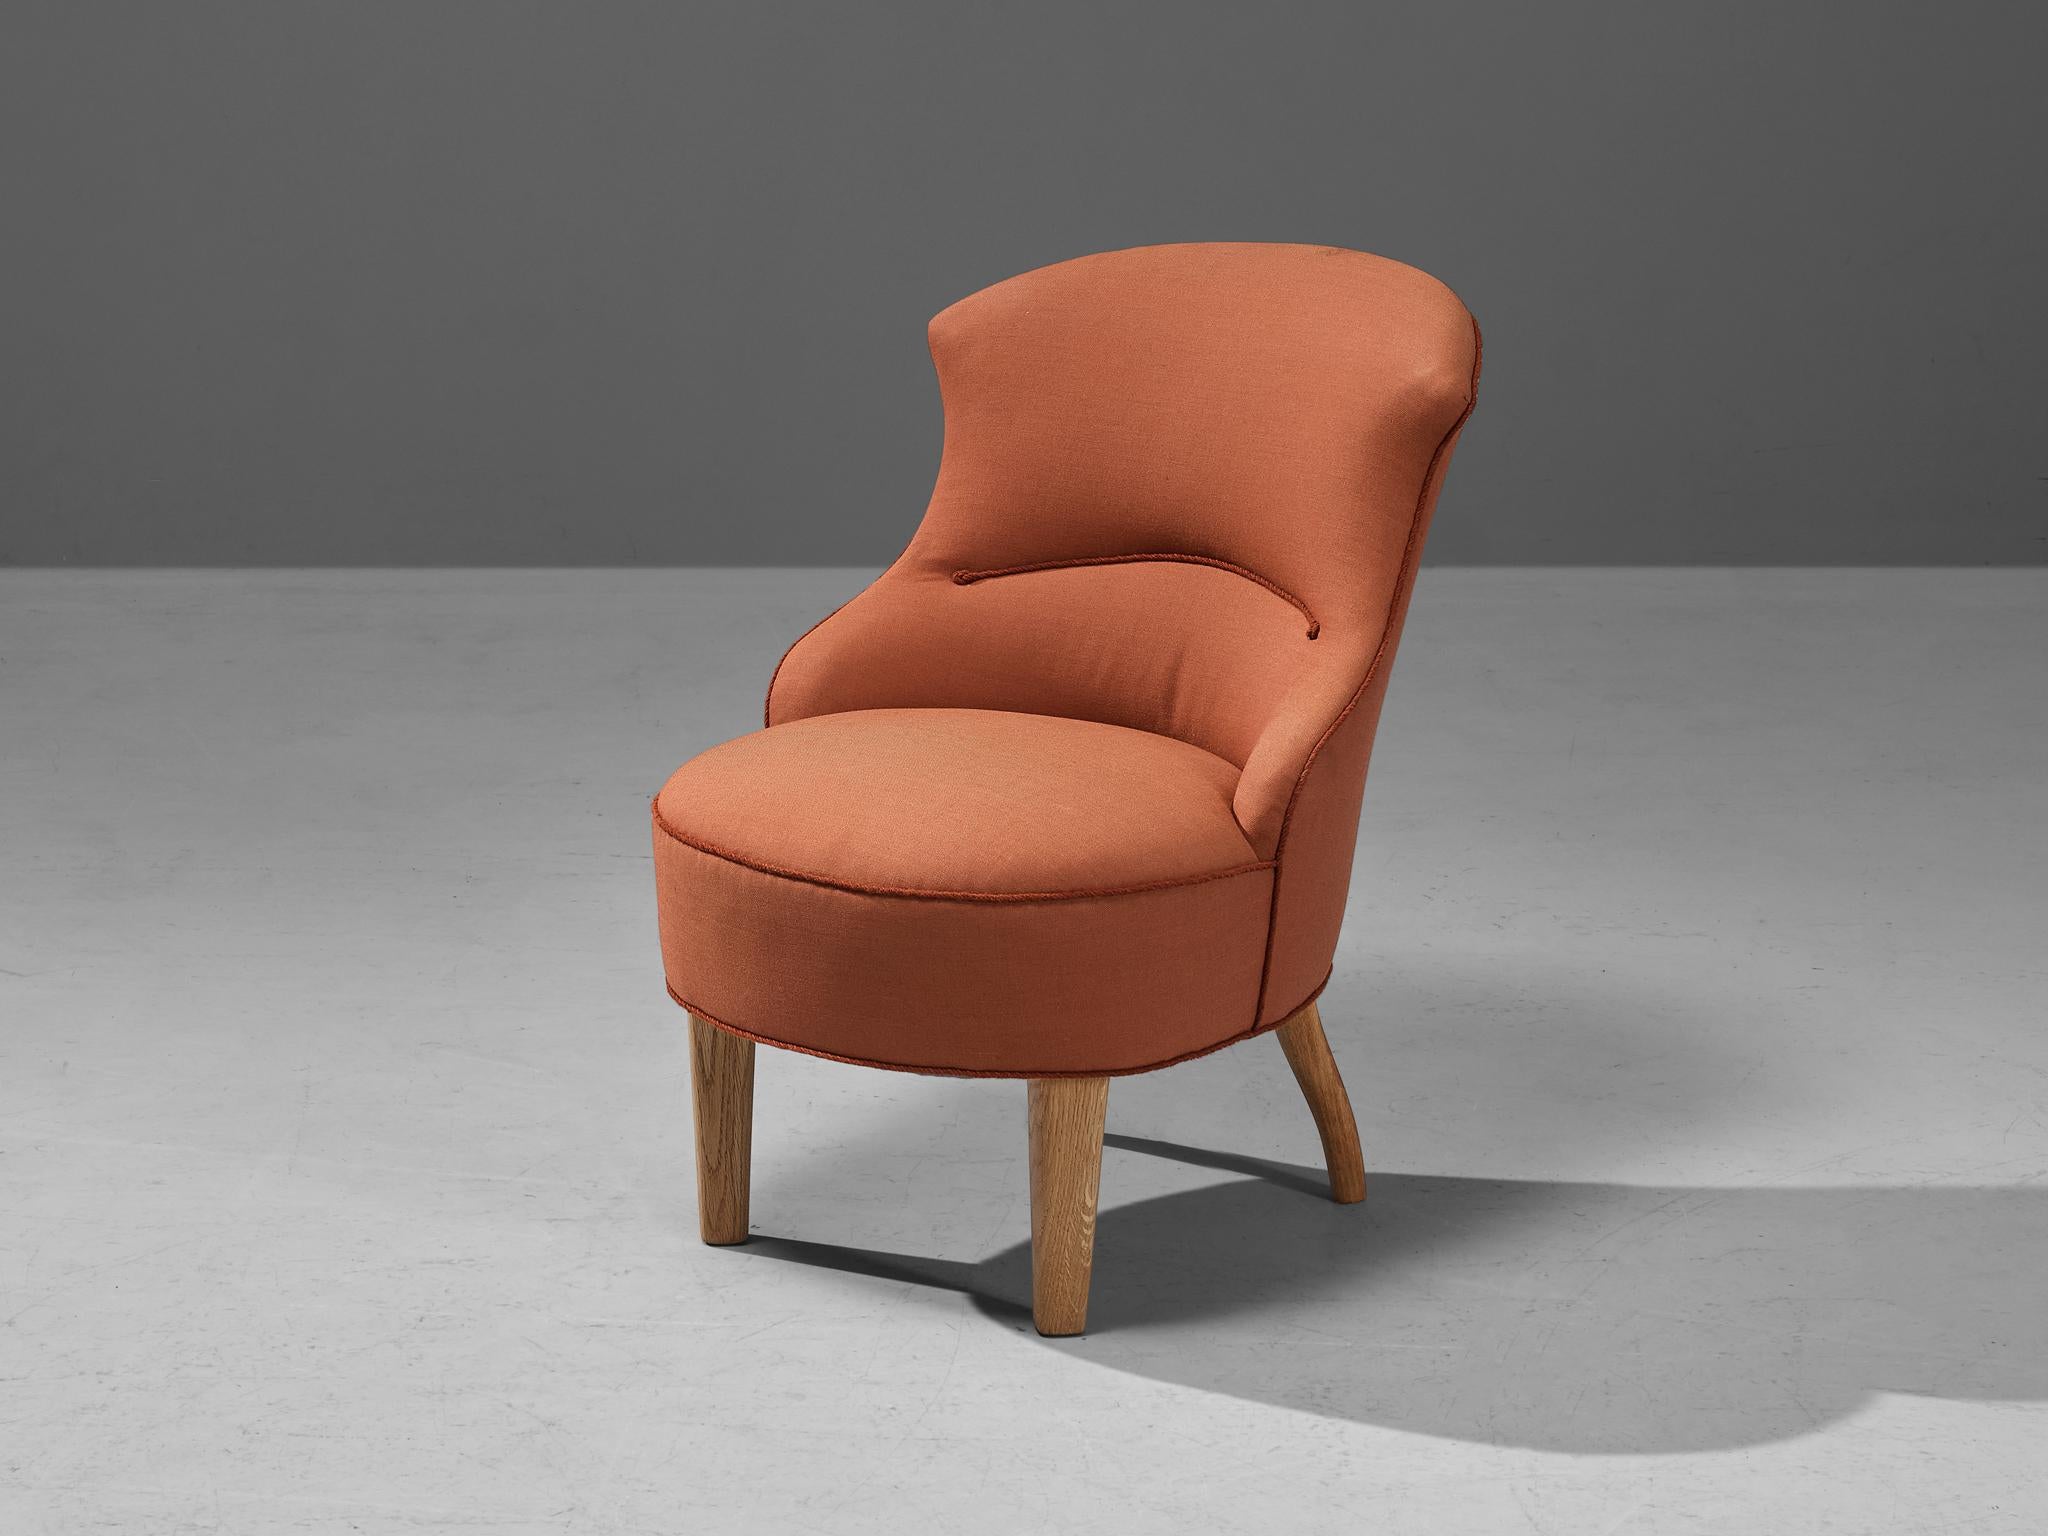 Easy chair, oak, beech, fabric, Denmark, 1960s 

This classic lounge chair of Danish origin features modest and subtle lines and shapes that emphasize the clear construction of the design. The designer decided to stay modest with decoration by